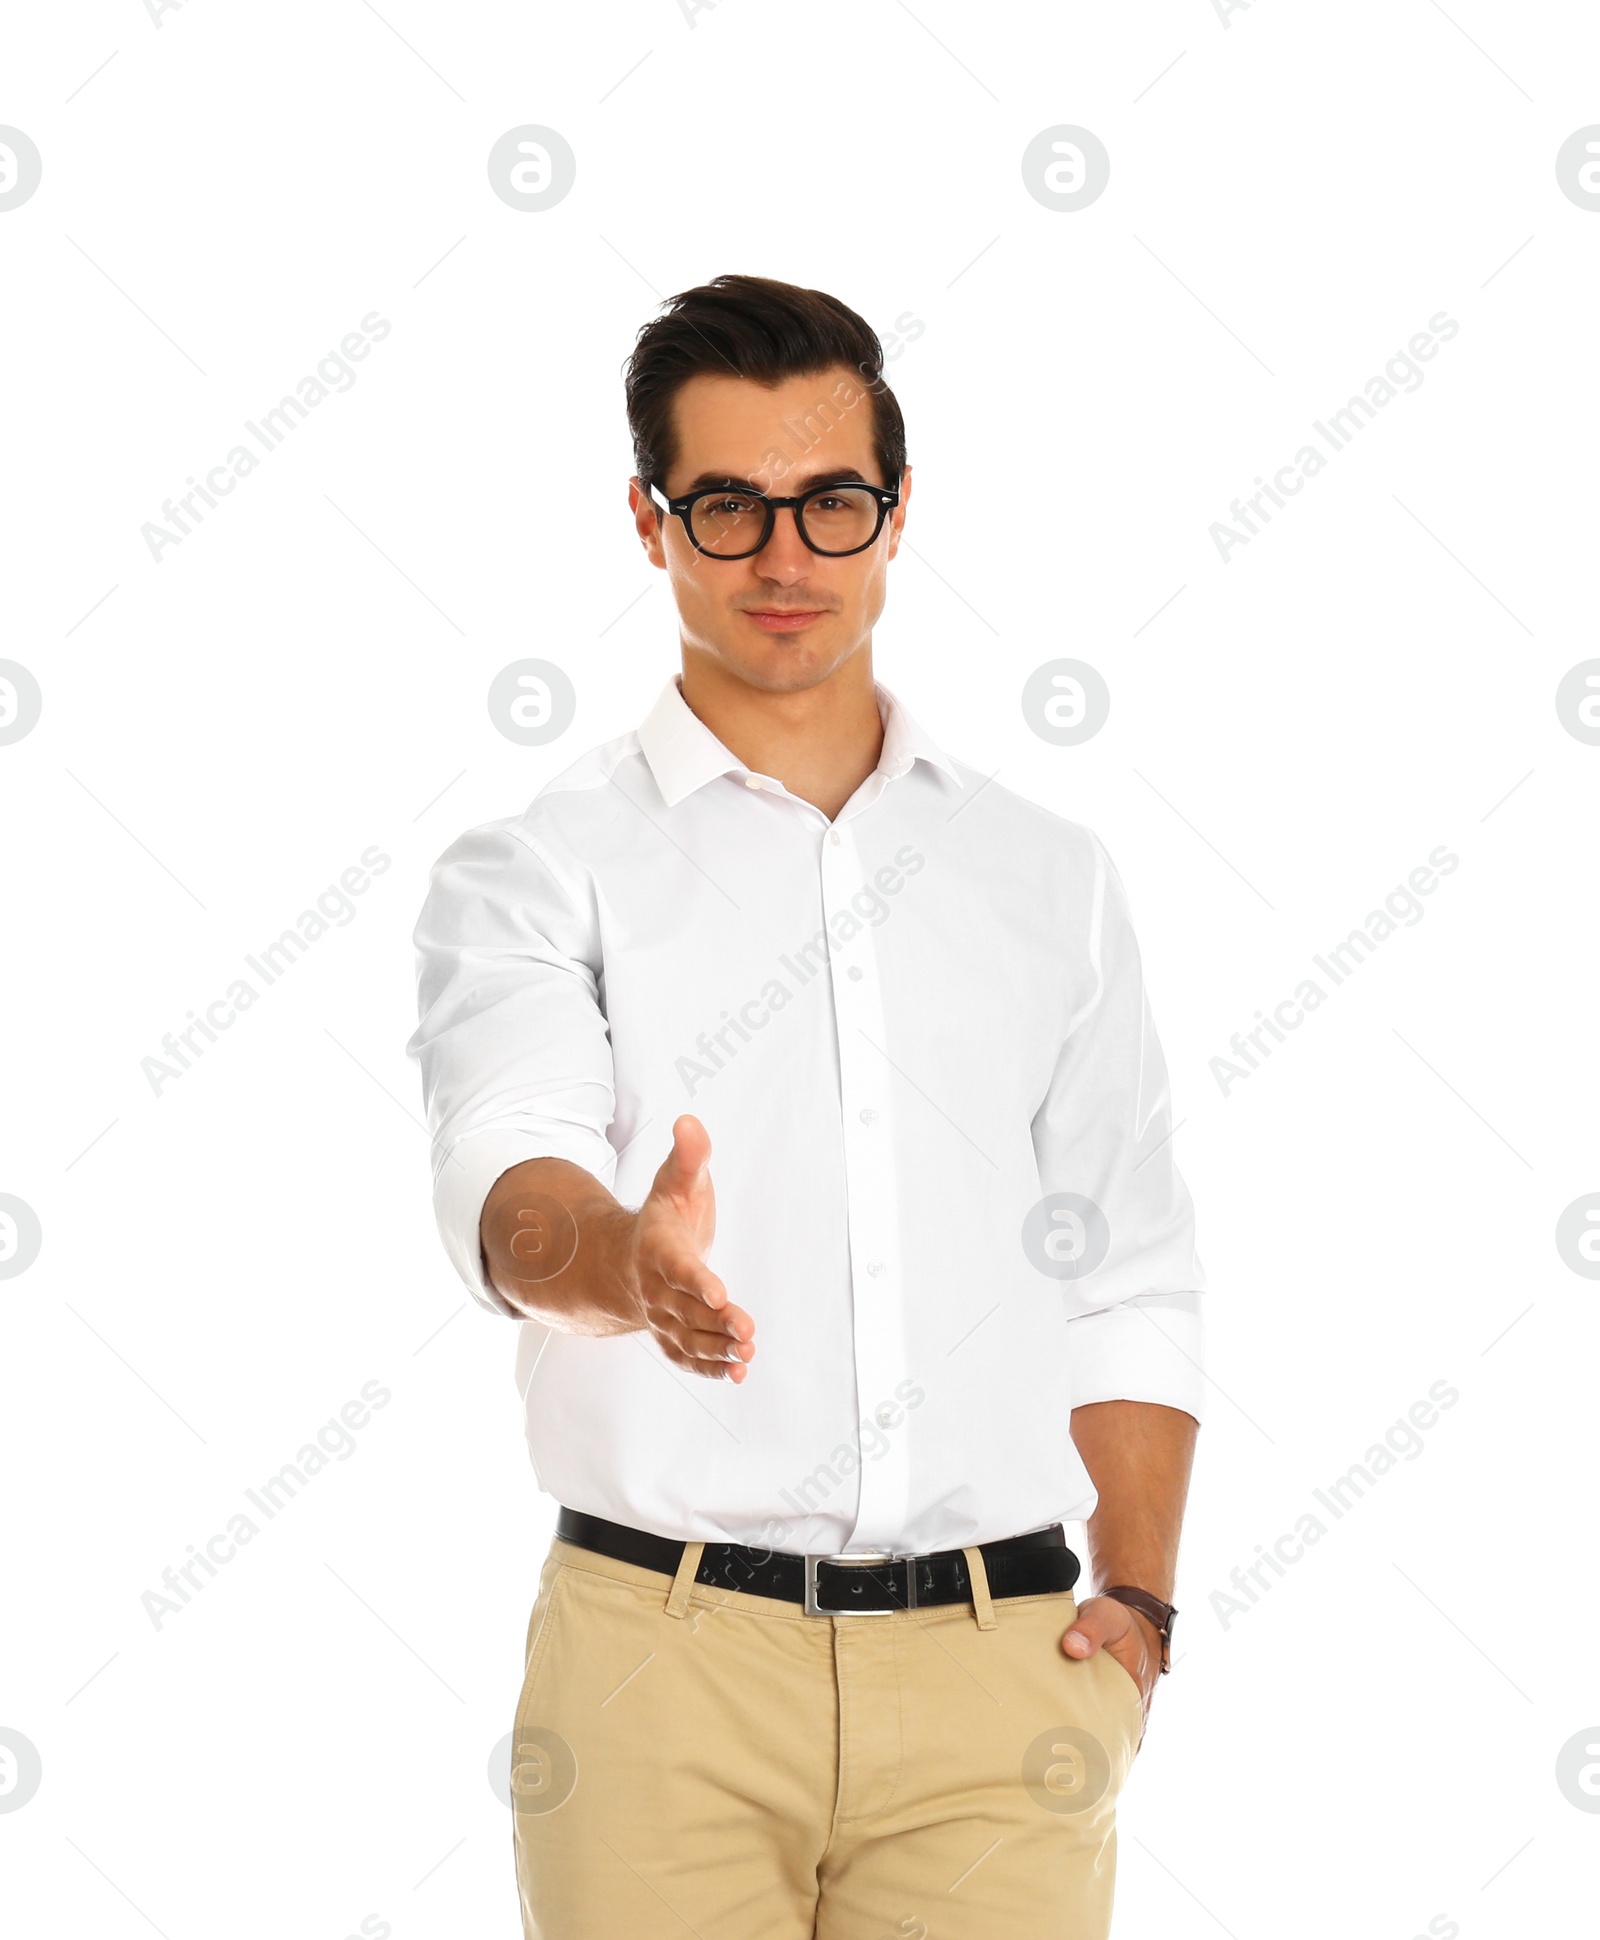 Photo of Professional business trainer offering handshake on white background